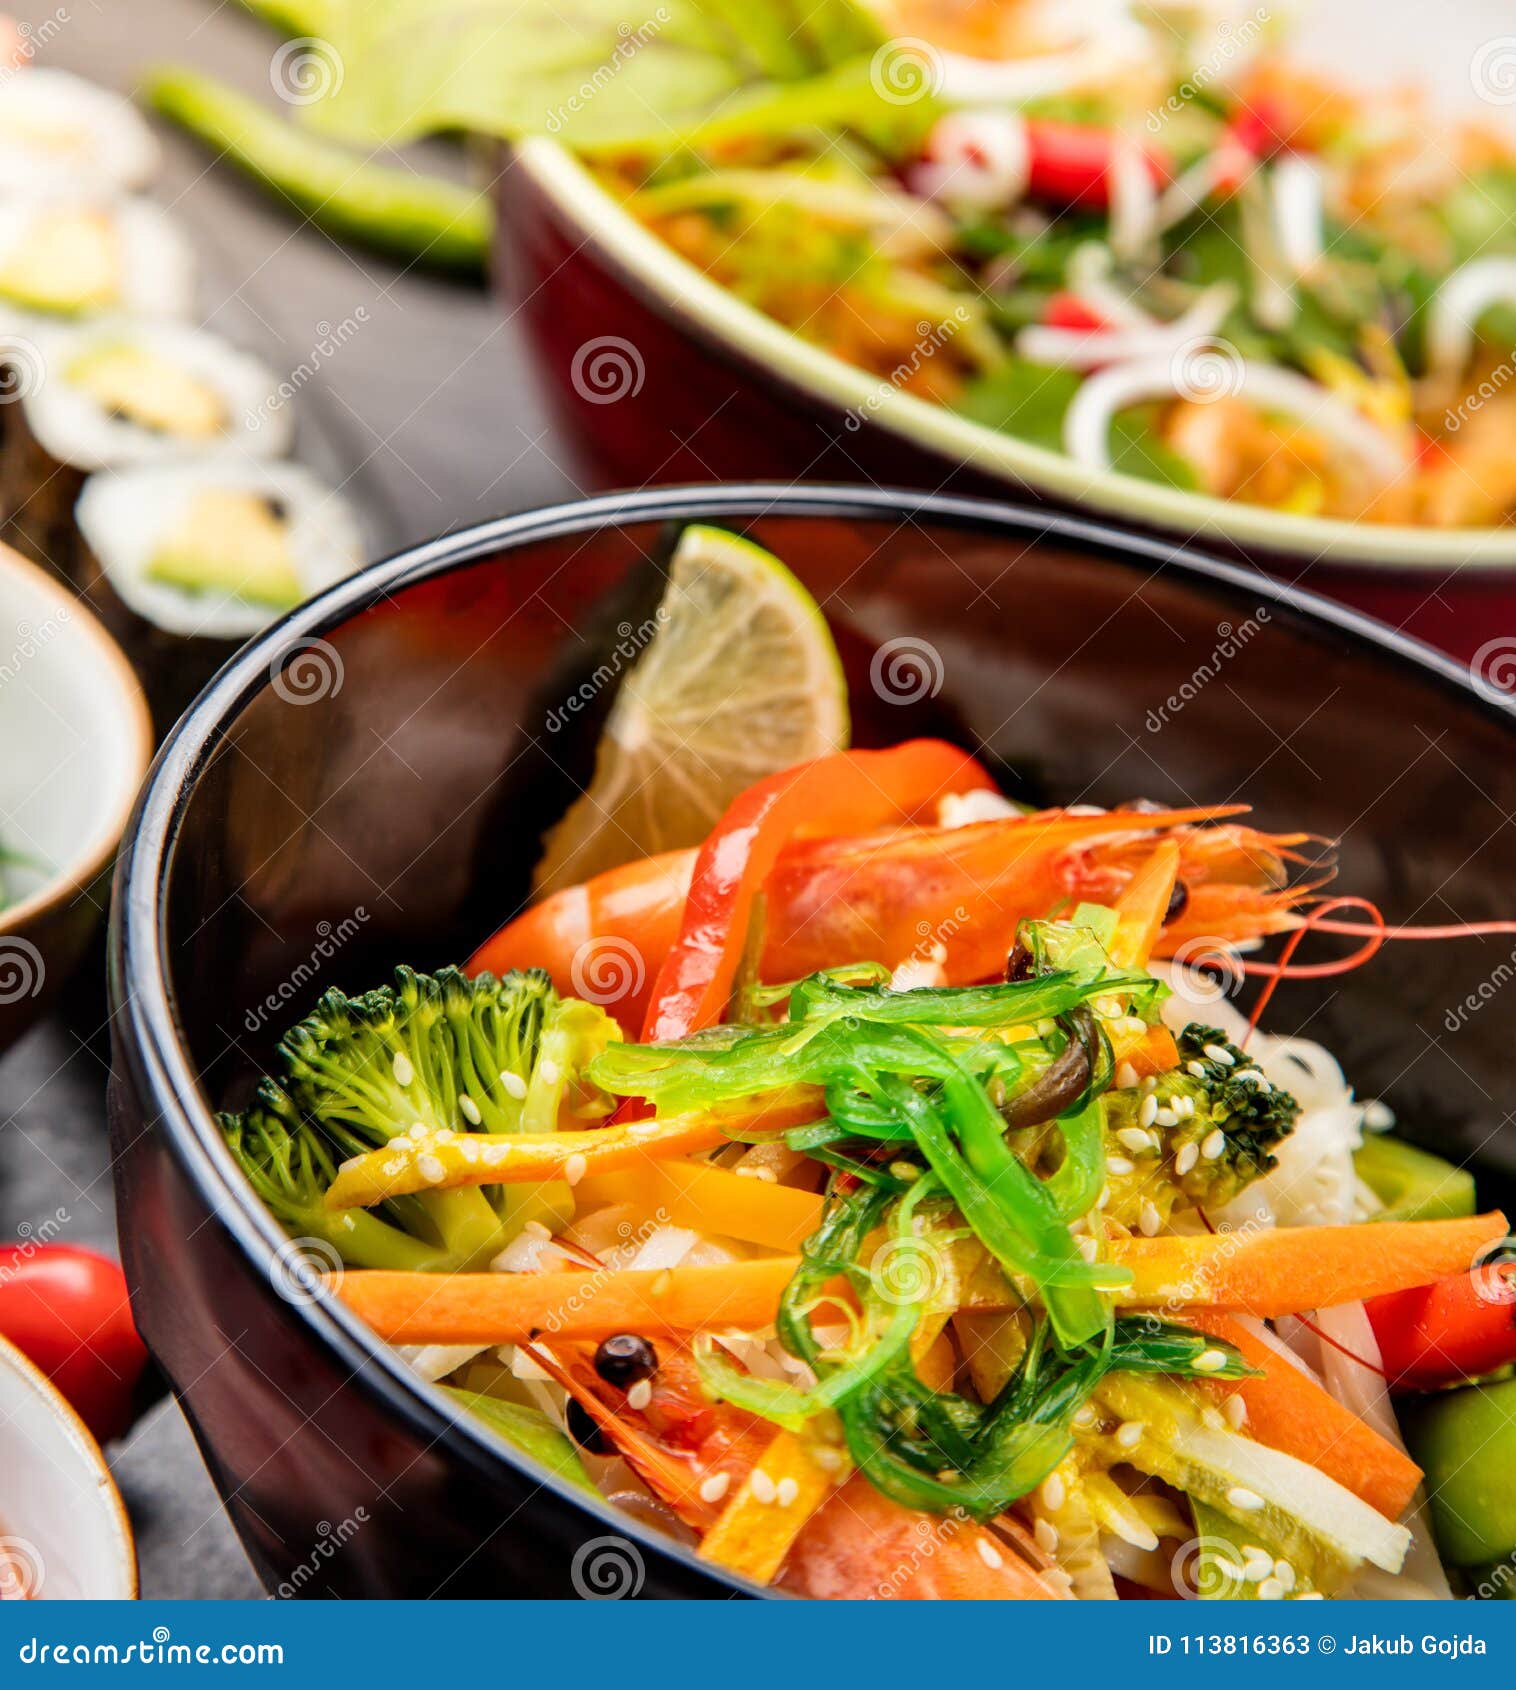 Asian Variation of Meals Served in Ceramic Bowls Stock Image - Image of ...